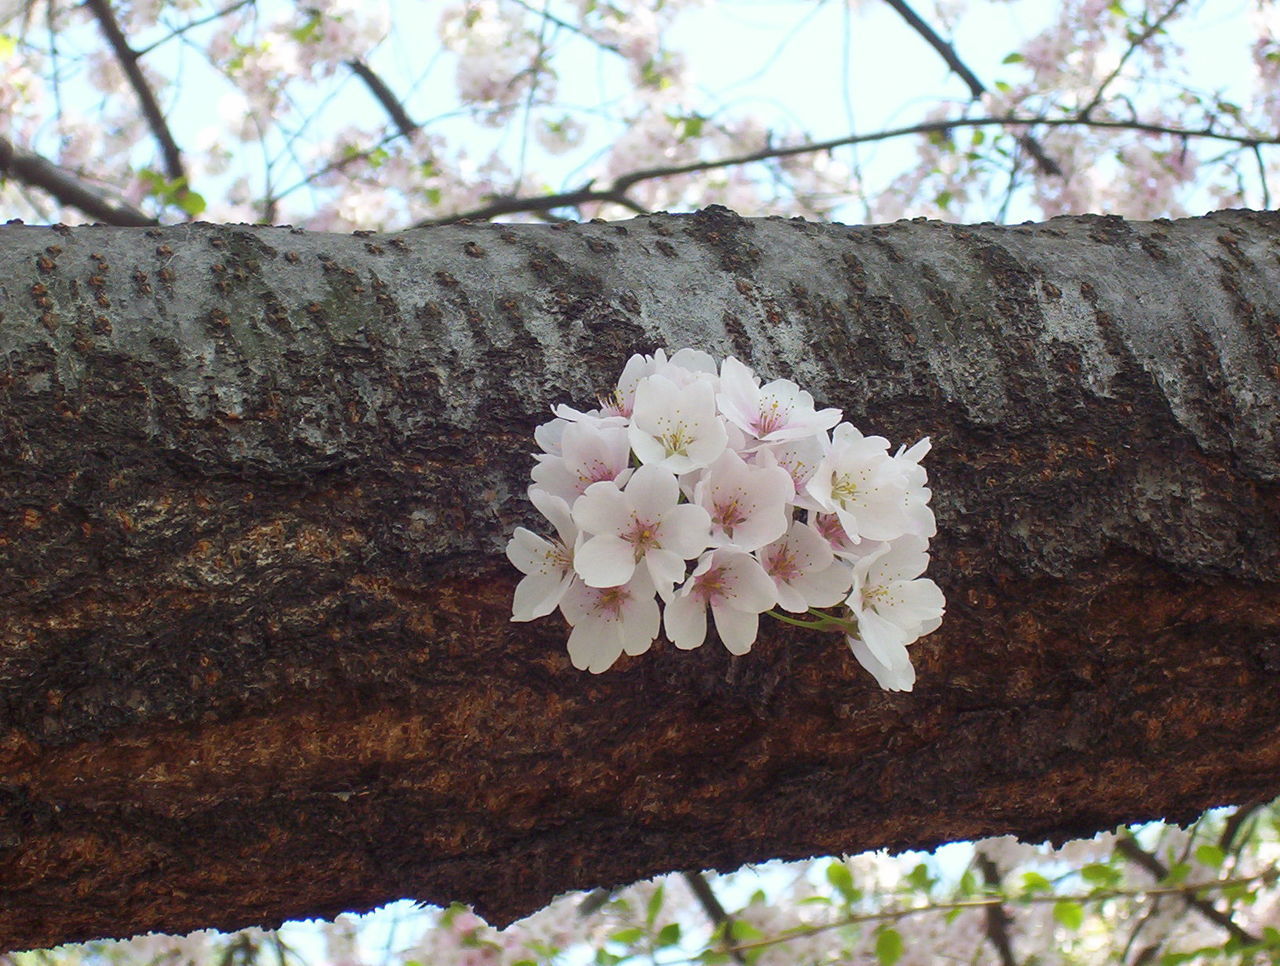 CLOSE-UP OF FRESH FLOWERS BLOOMING IN TREE